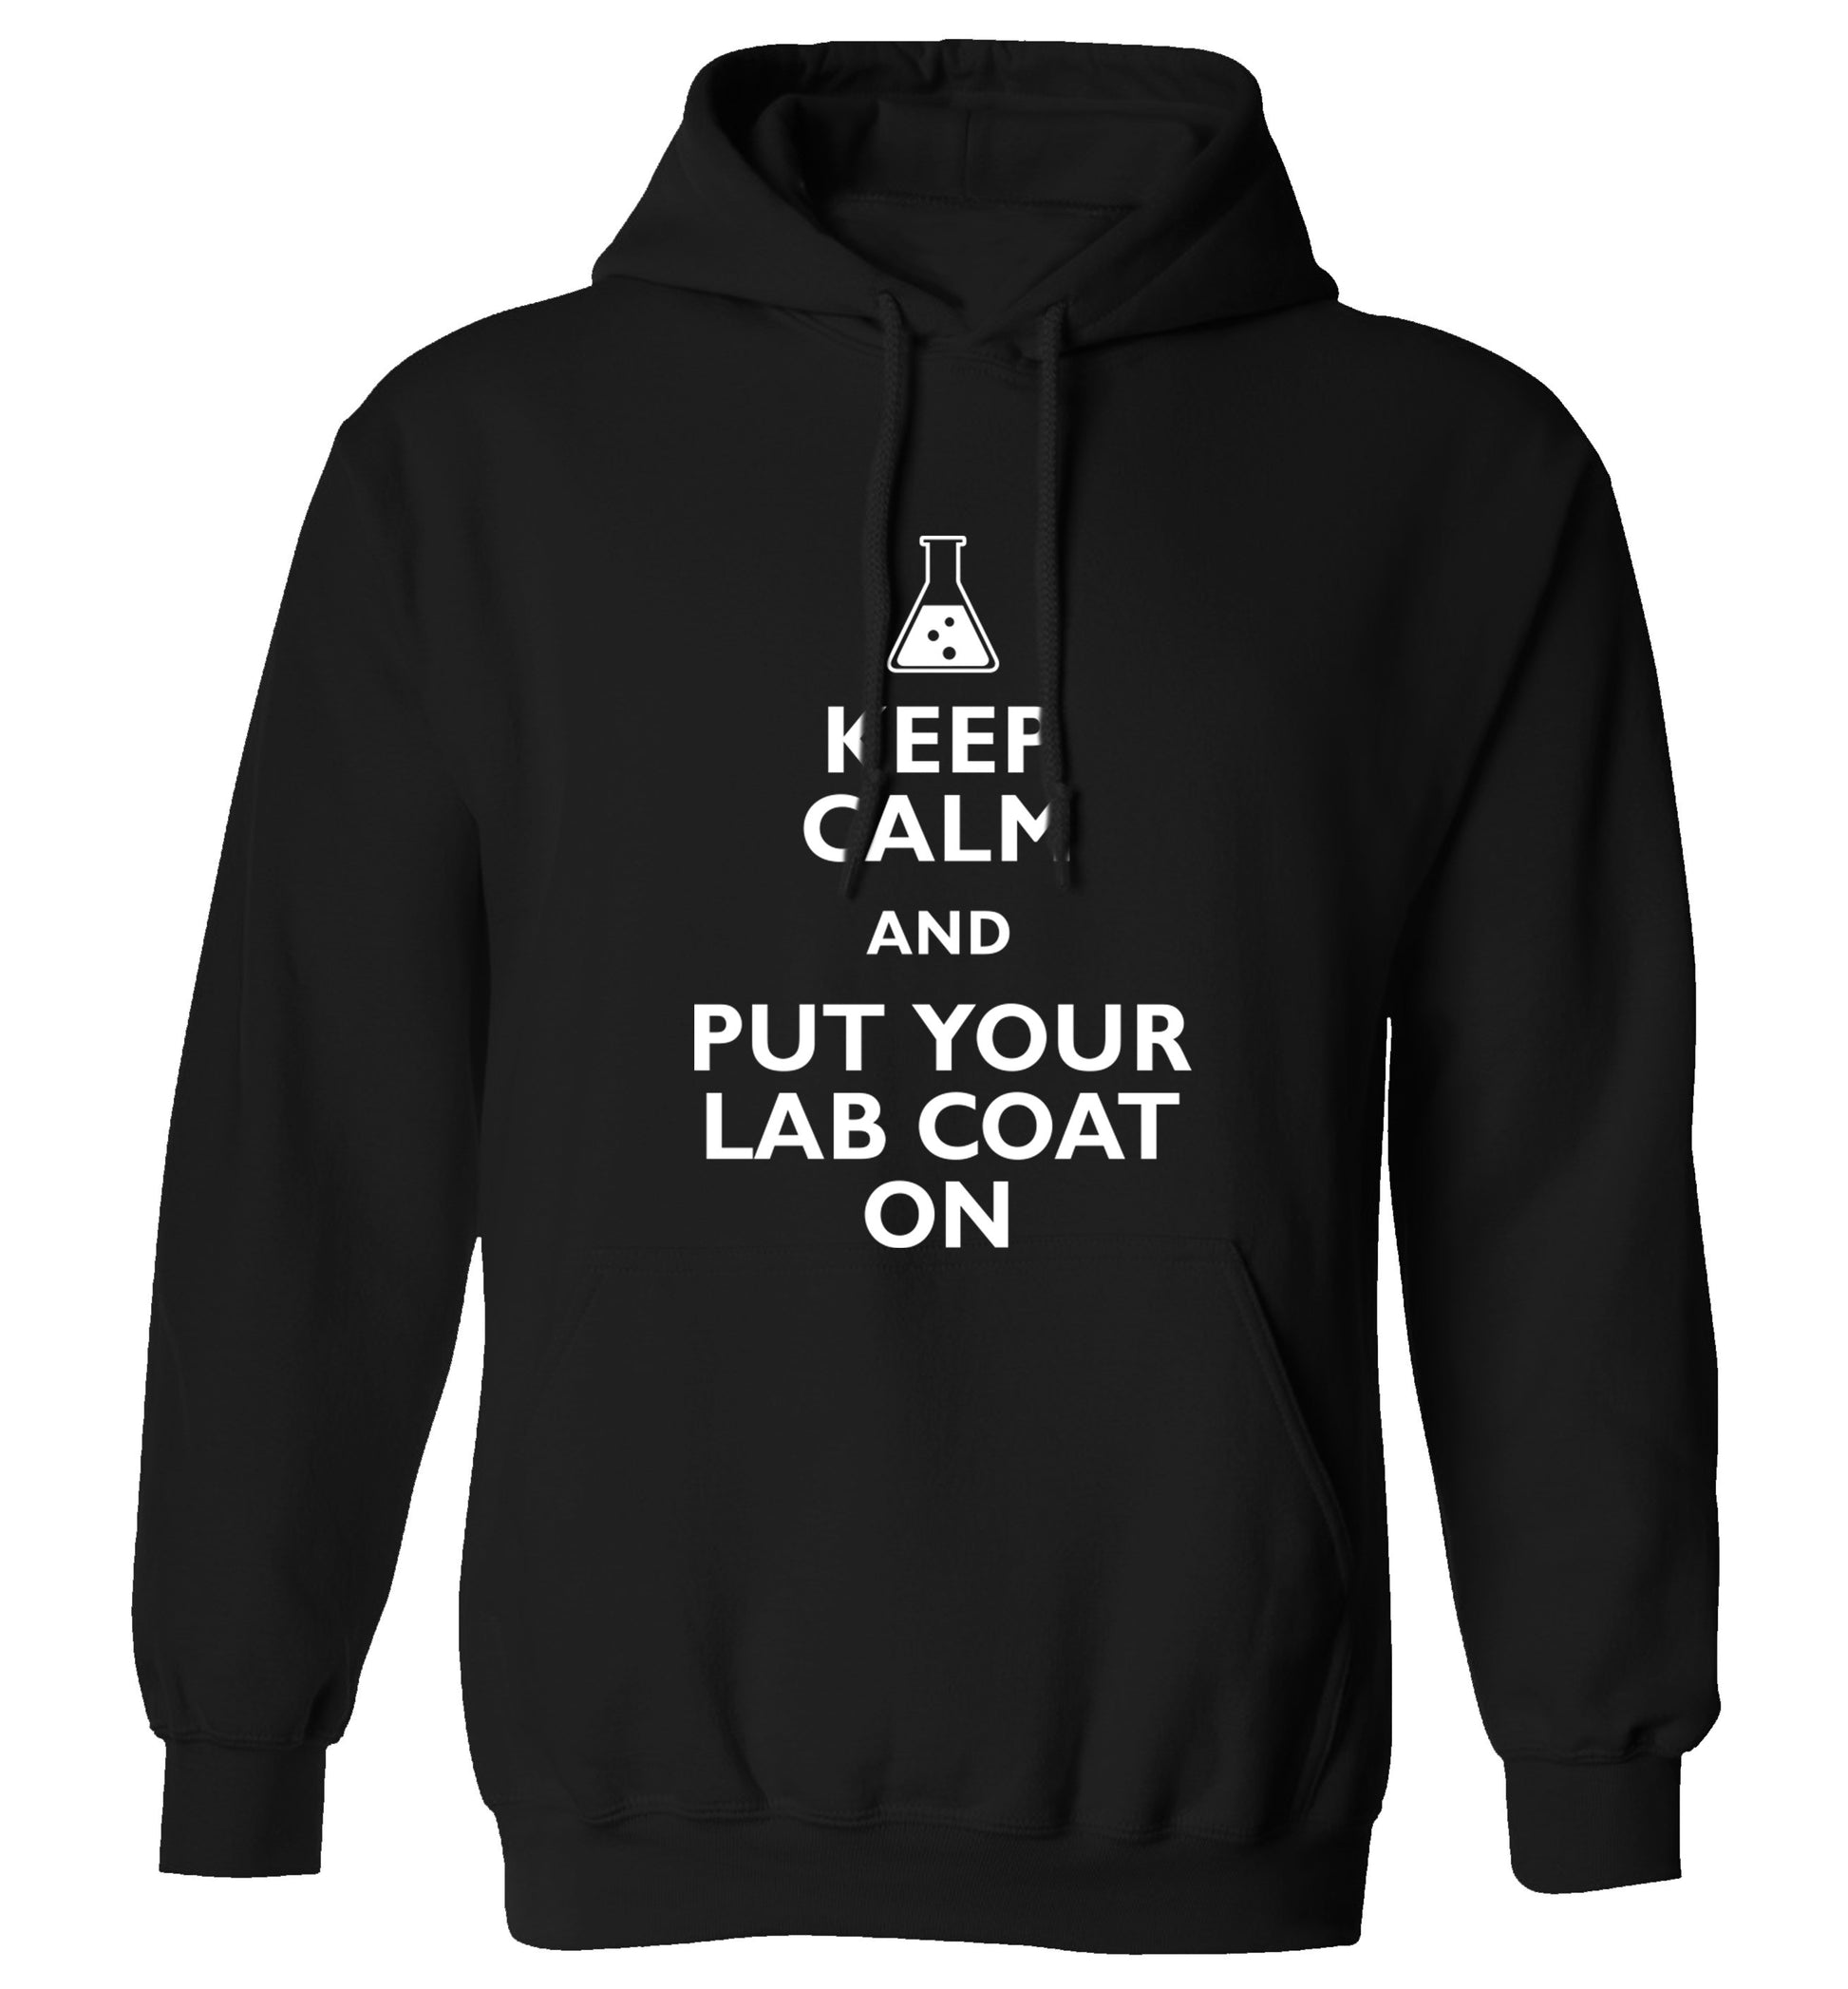 Keep calm and put your lab coat on adults unisex black hoodie 2XL